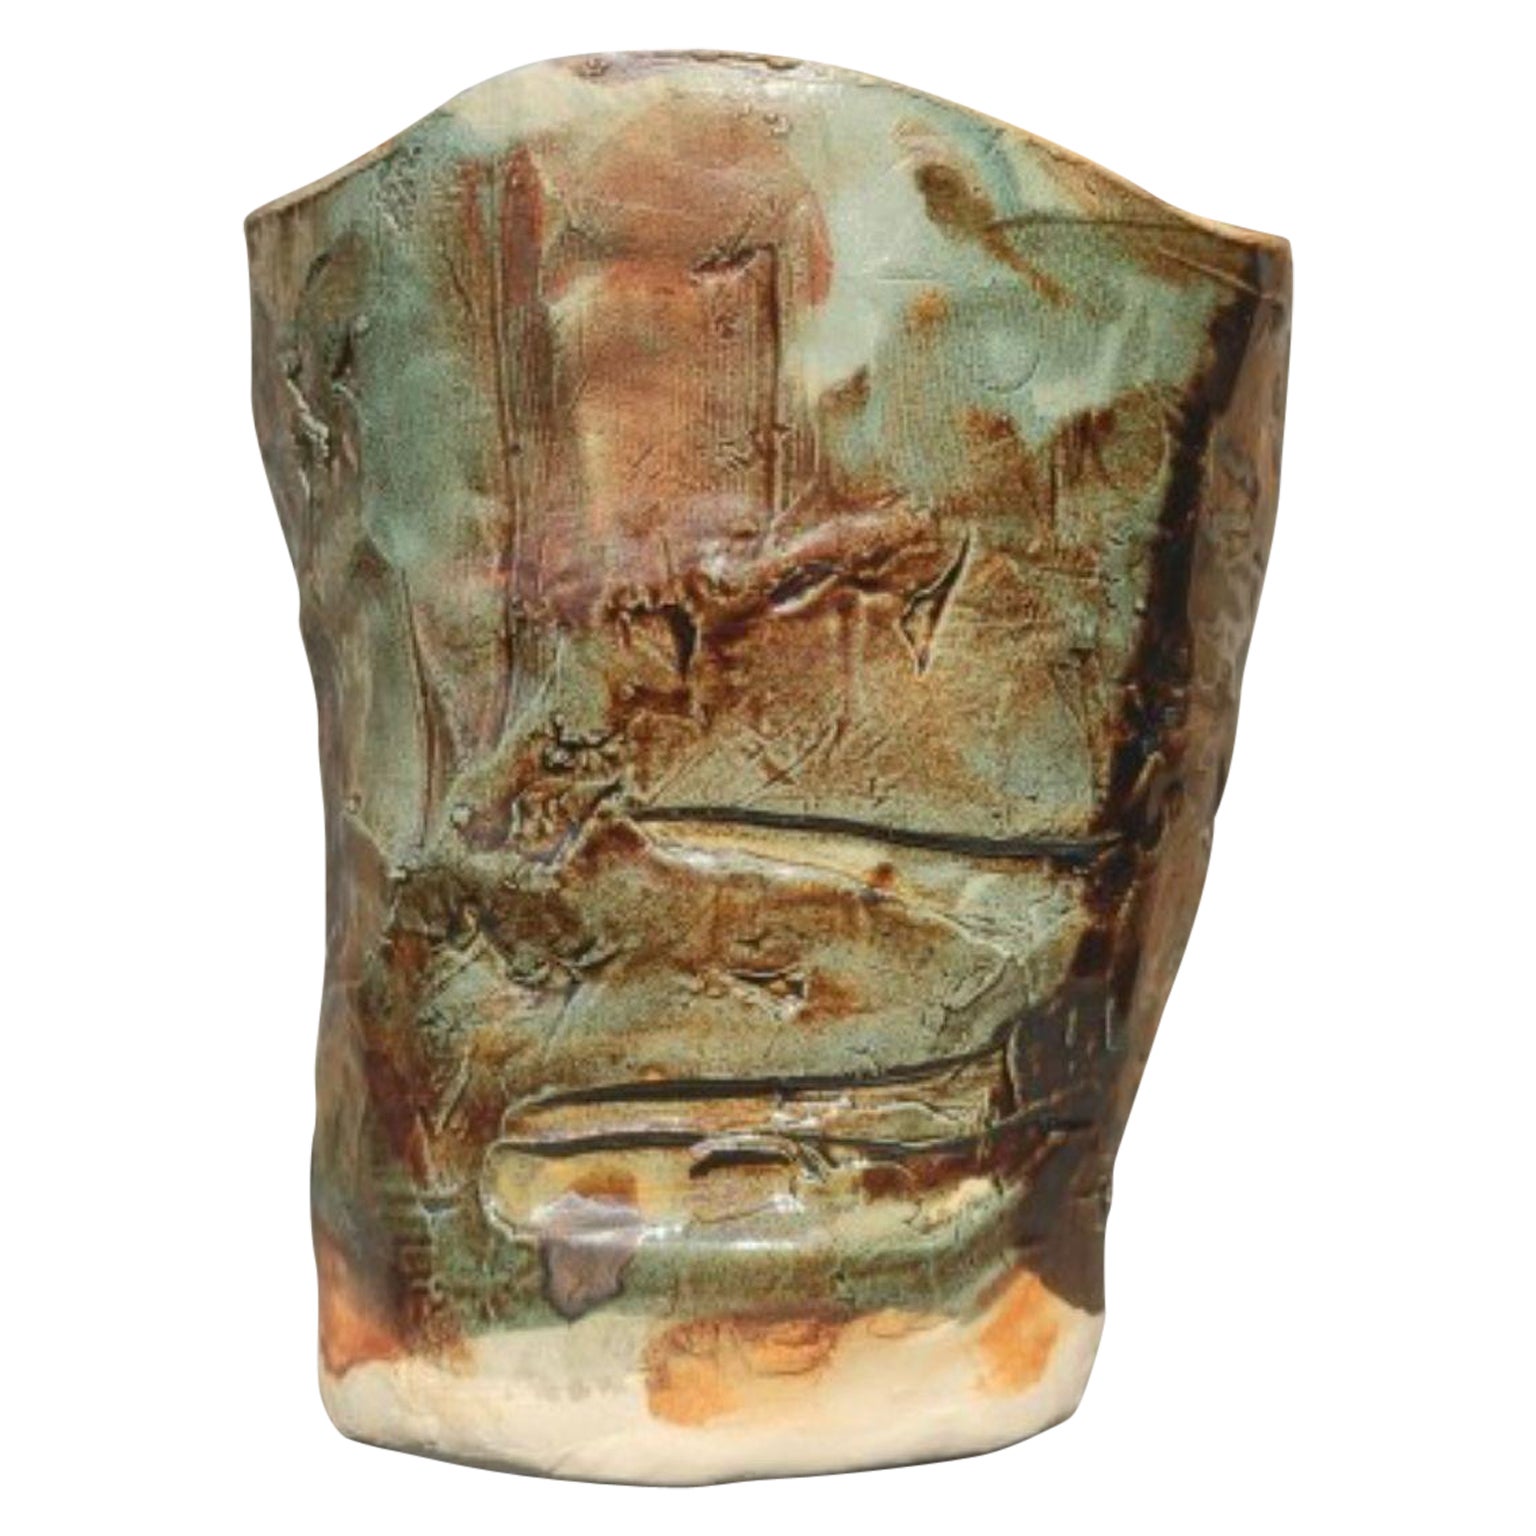 Rustyvase 1 Stoneware Vase by Odatempo For Sale